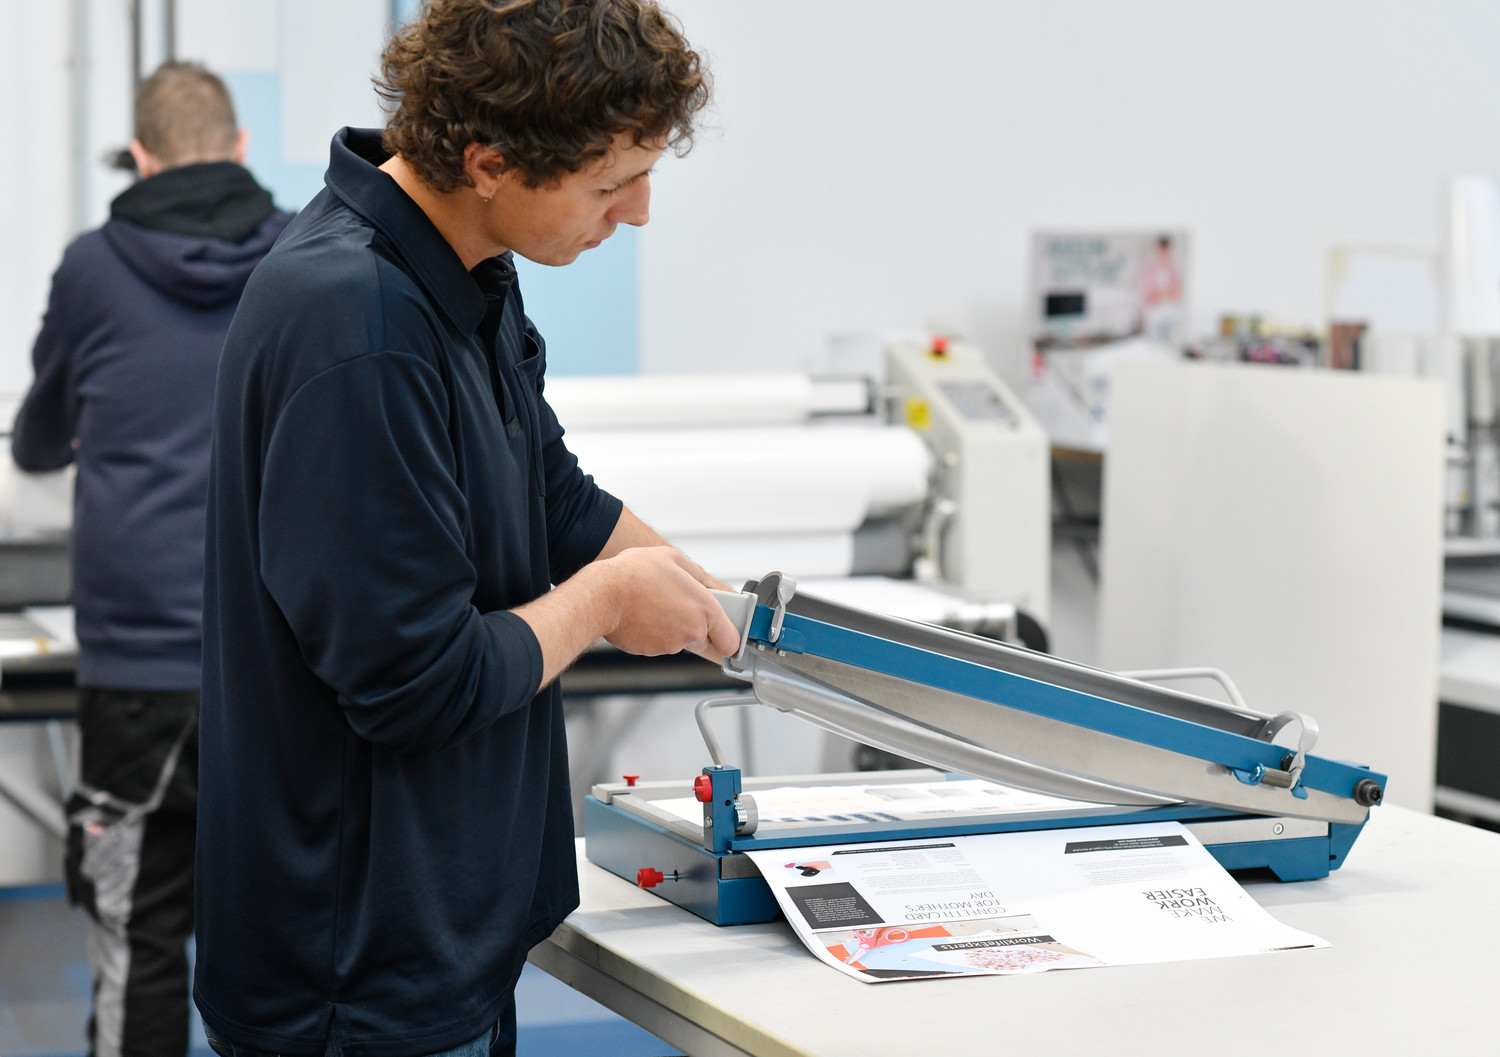 The unique Dahle automatic safety guard exposes the sharp upper blade only at the point where the cut occurs. This ensures reliable protection and an unimpeded view of the cutting edge, allowing precise alignment of the material to be cut.